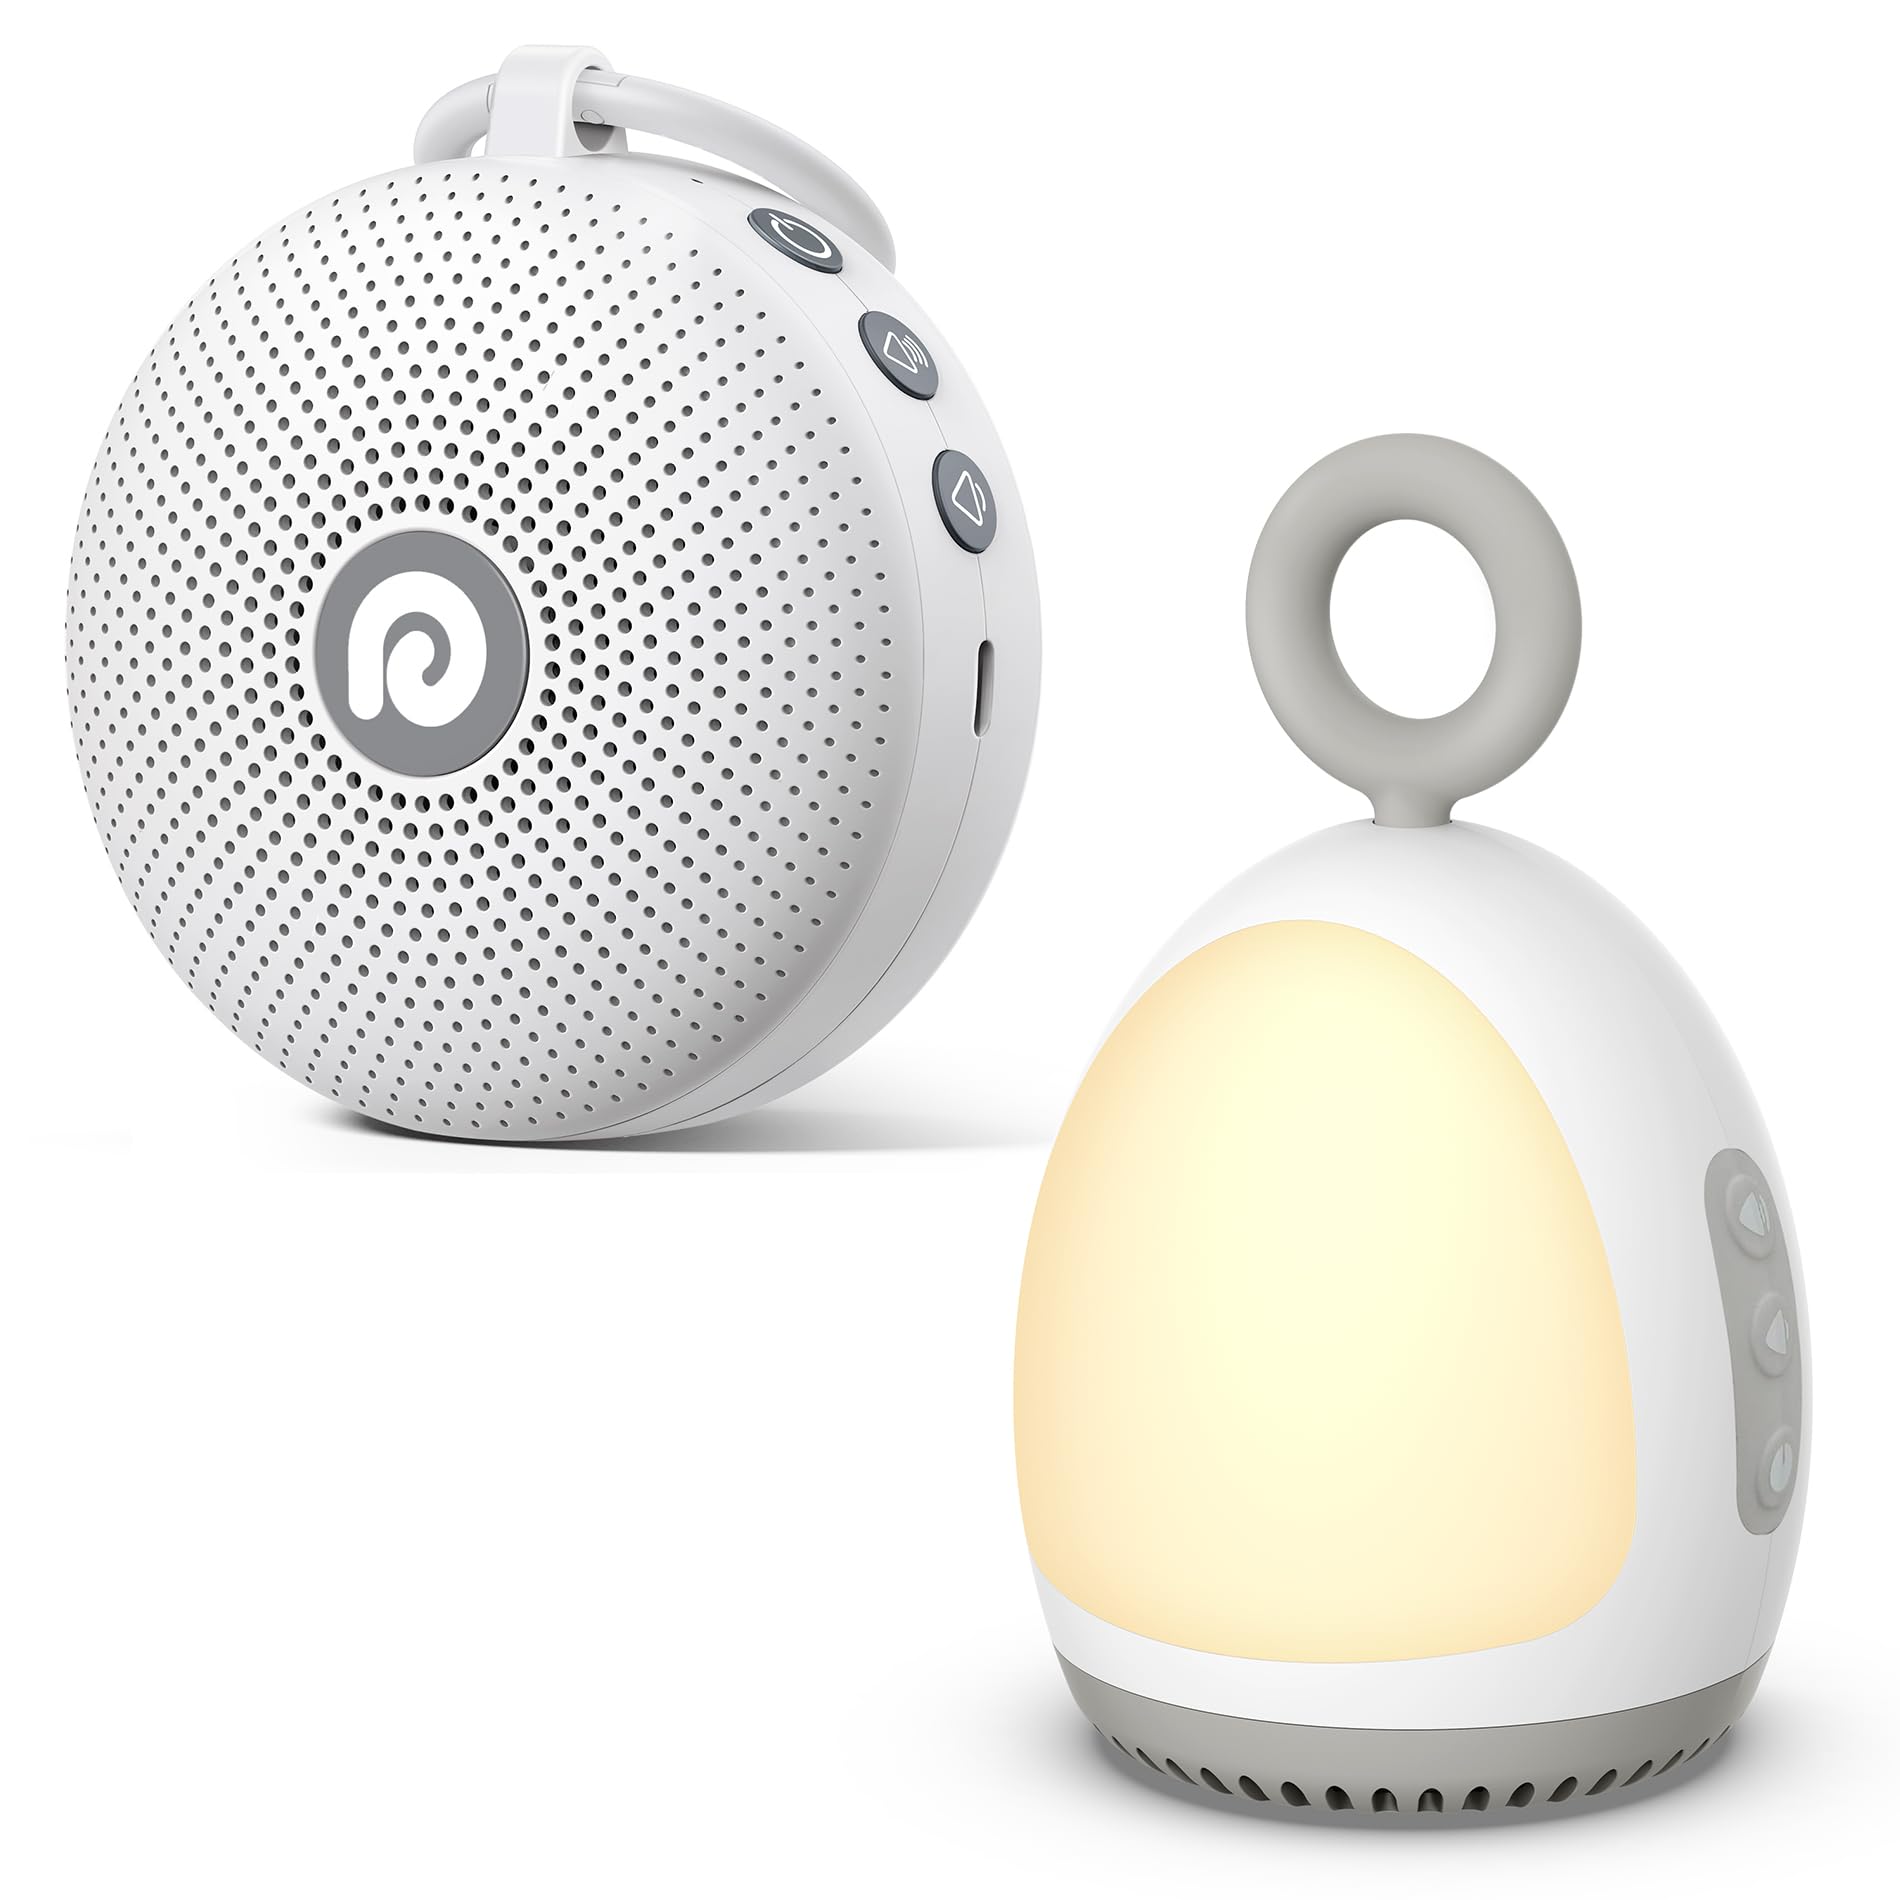 Dreamegg D11 Max White Bundle with XT-6 Grey Portable Sound Machine for Baby, Soothing Sound, Noise Canceling for Office&Sleeping, Sound Therapy for Home, Travel, Registry Gift